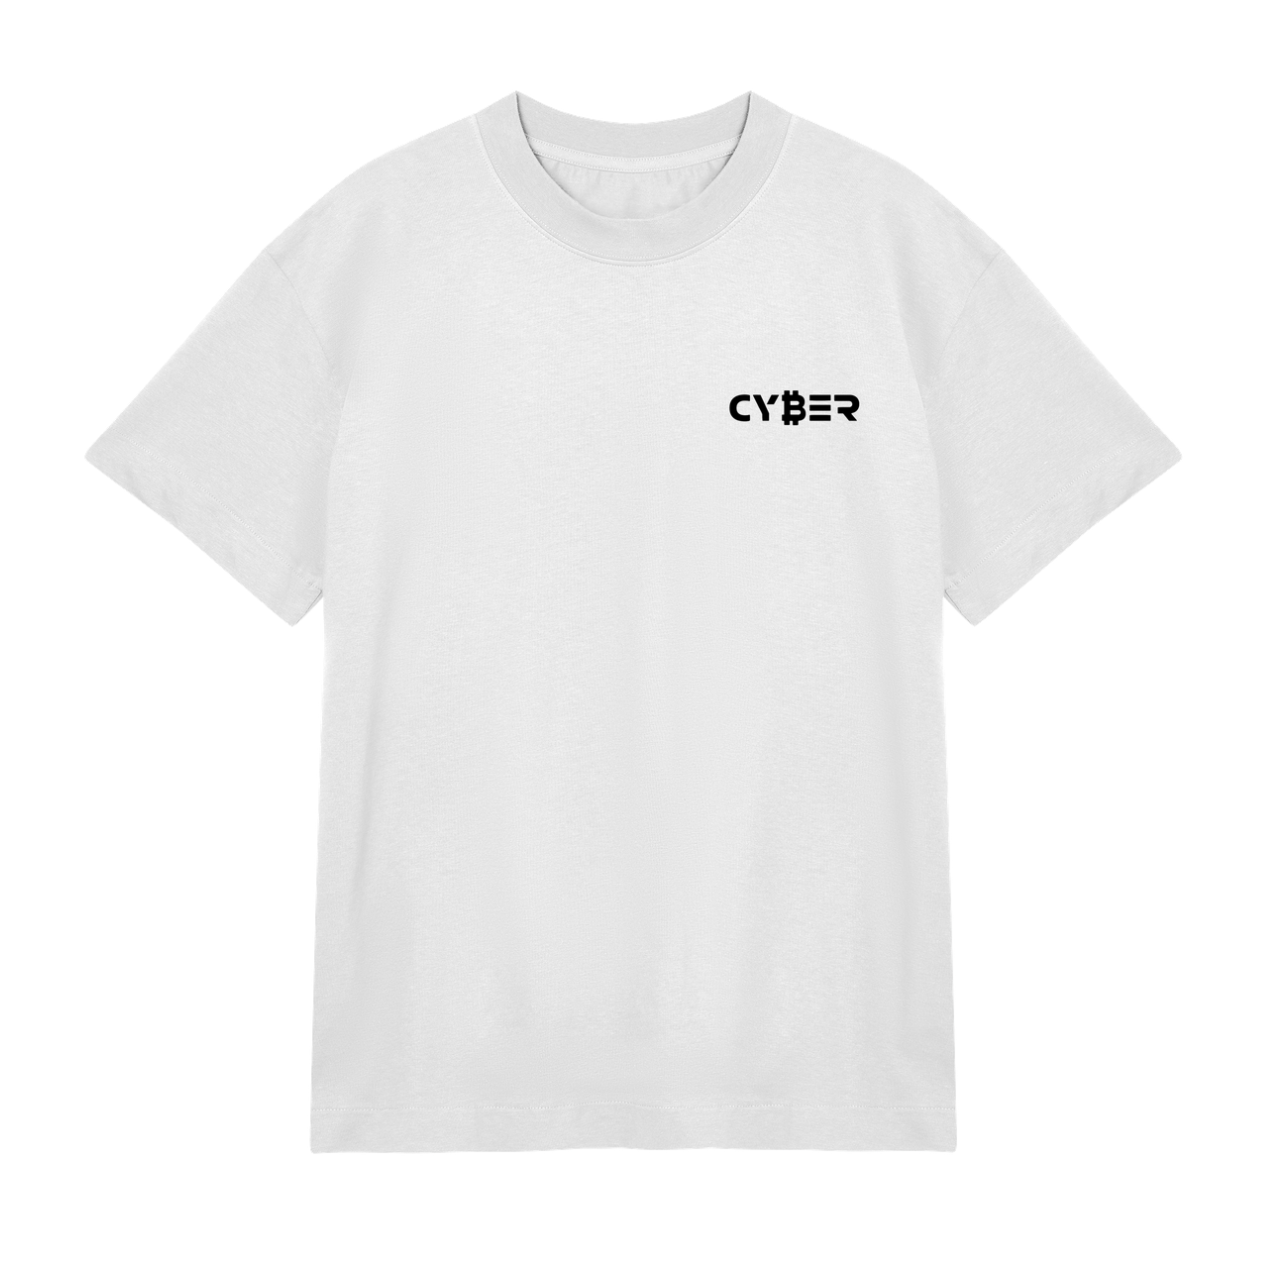 Cyber Soldiers Tee